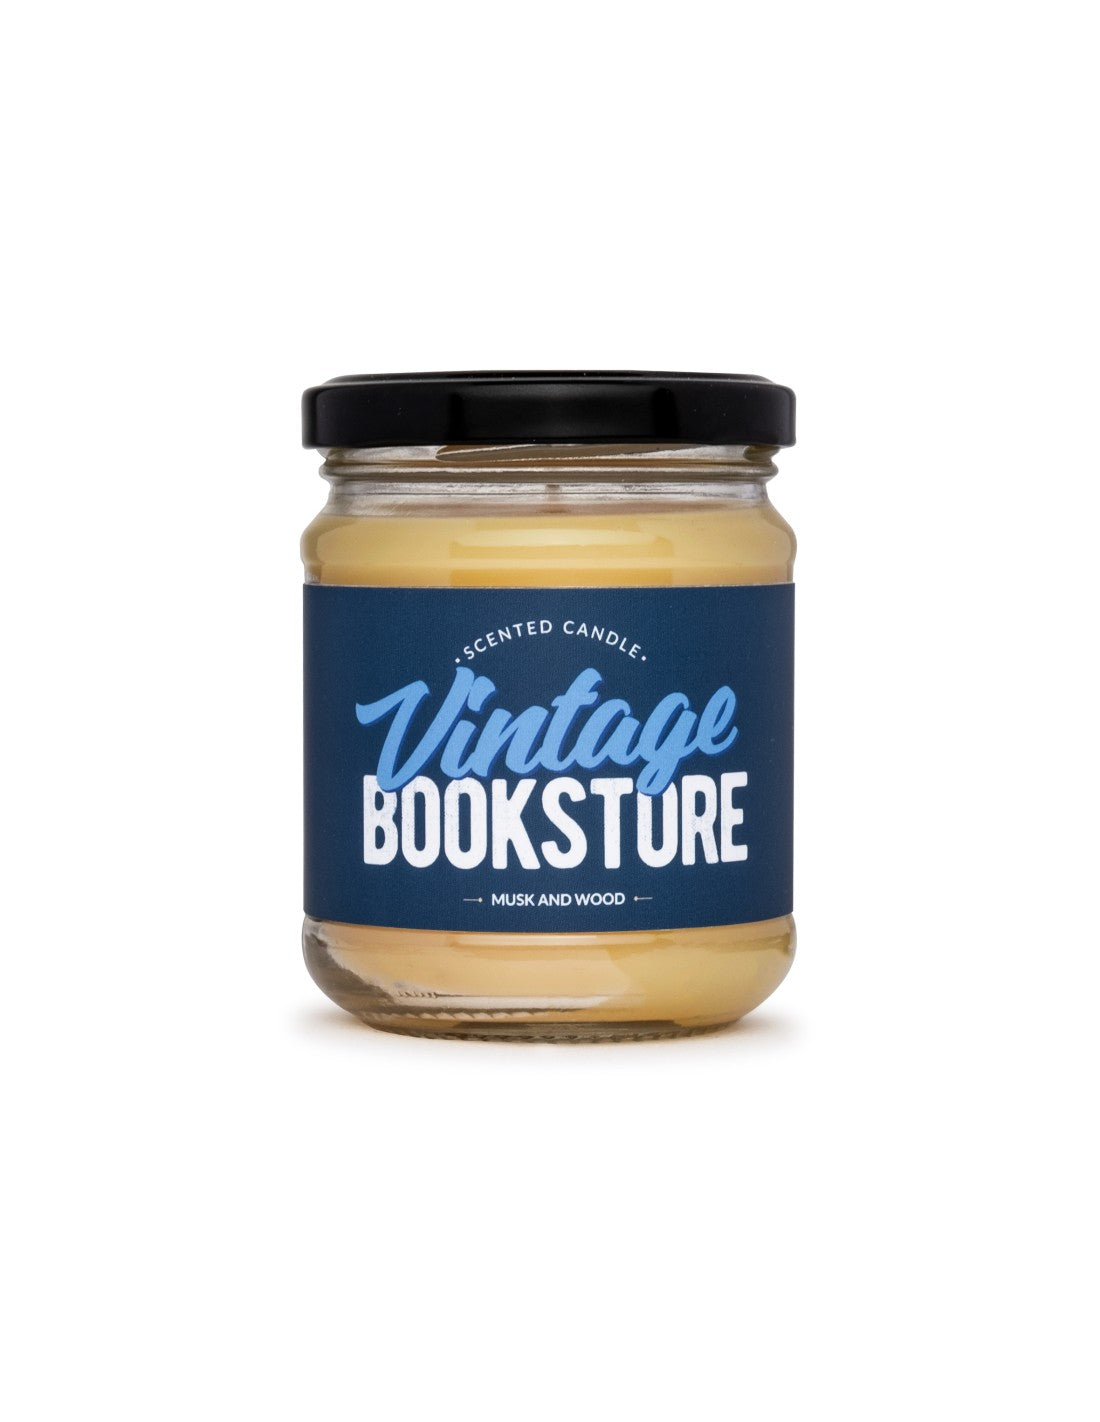 Beeswax Candle "Vingate Bookstore"